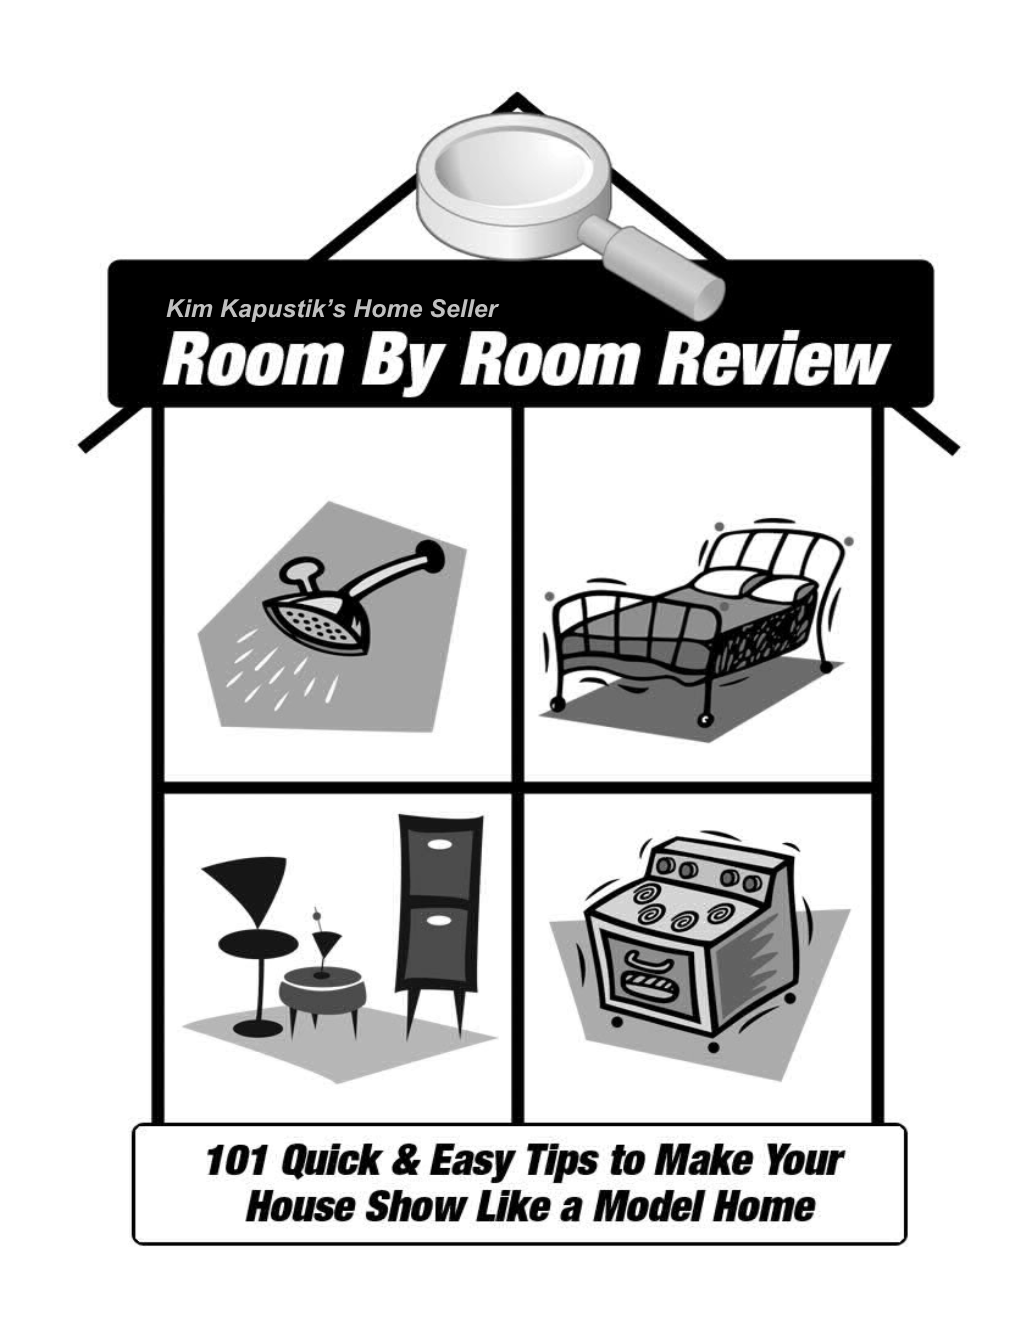 Room by Room Review